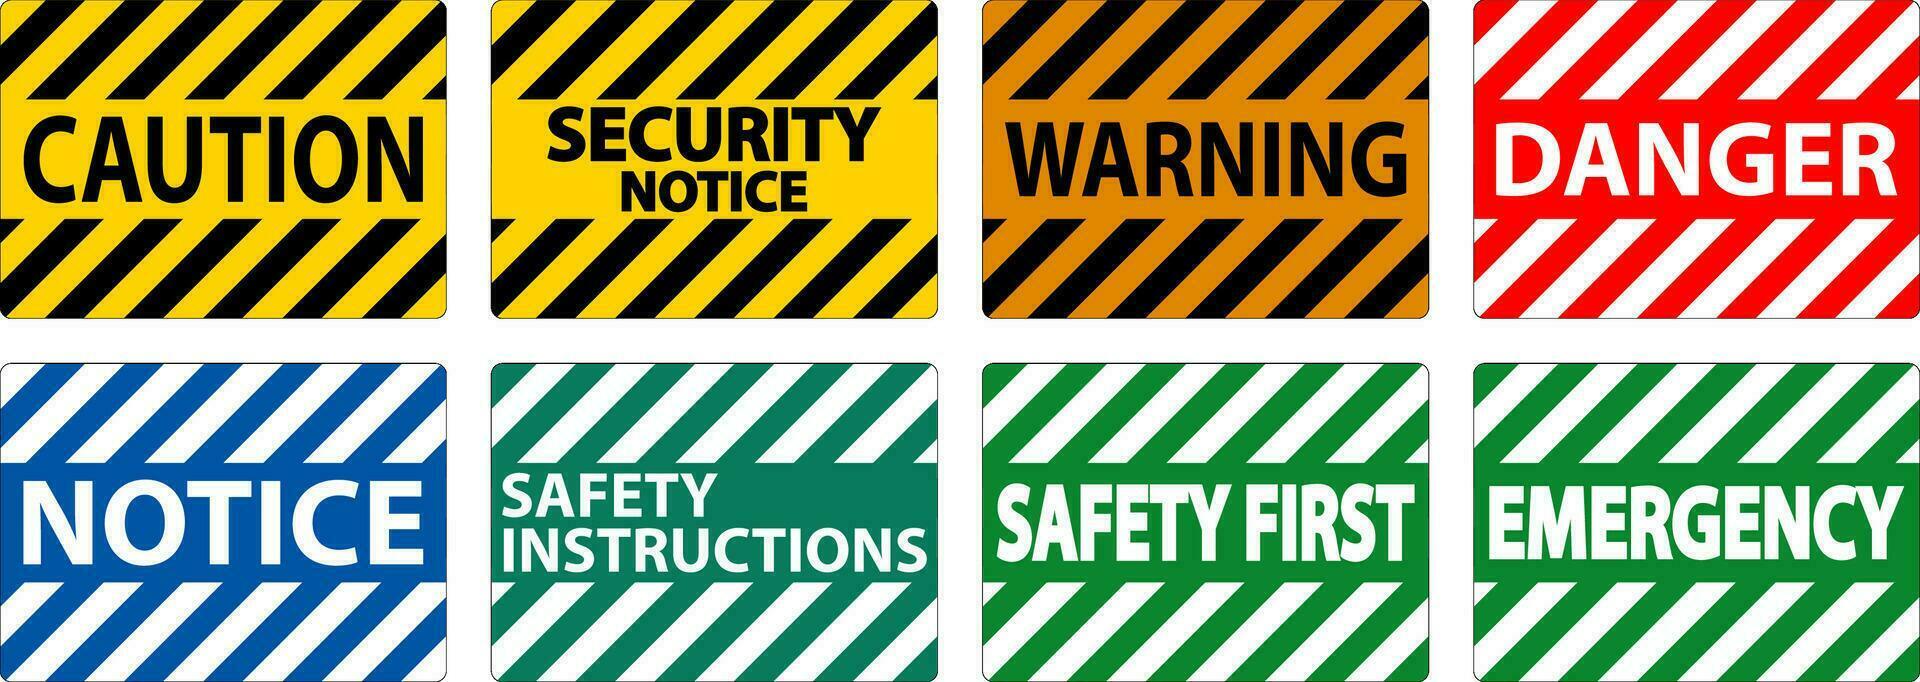 Caution, Notice, Security notice, Emergency, Safety first, Safety instructions, Danger, Warning sign vector